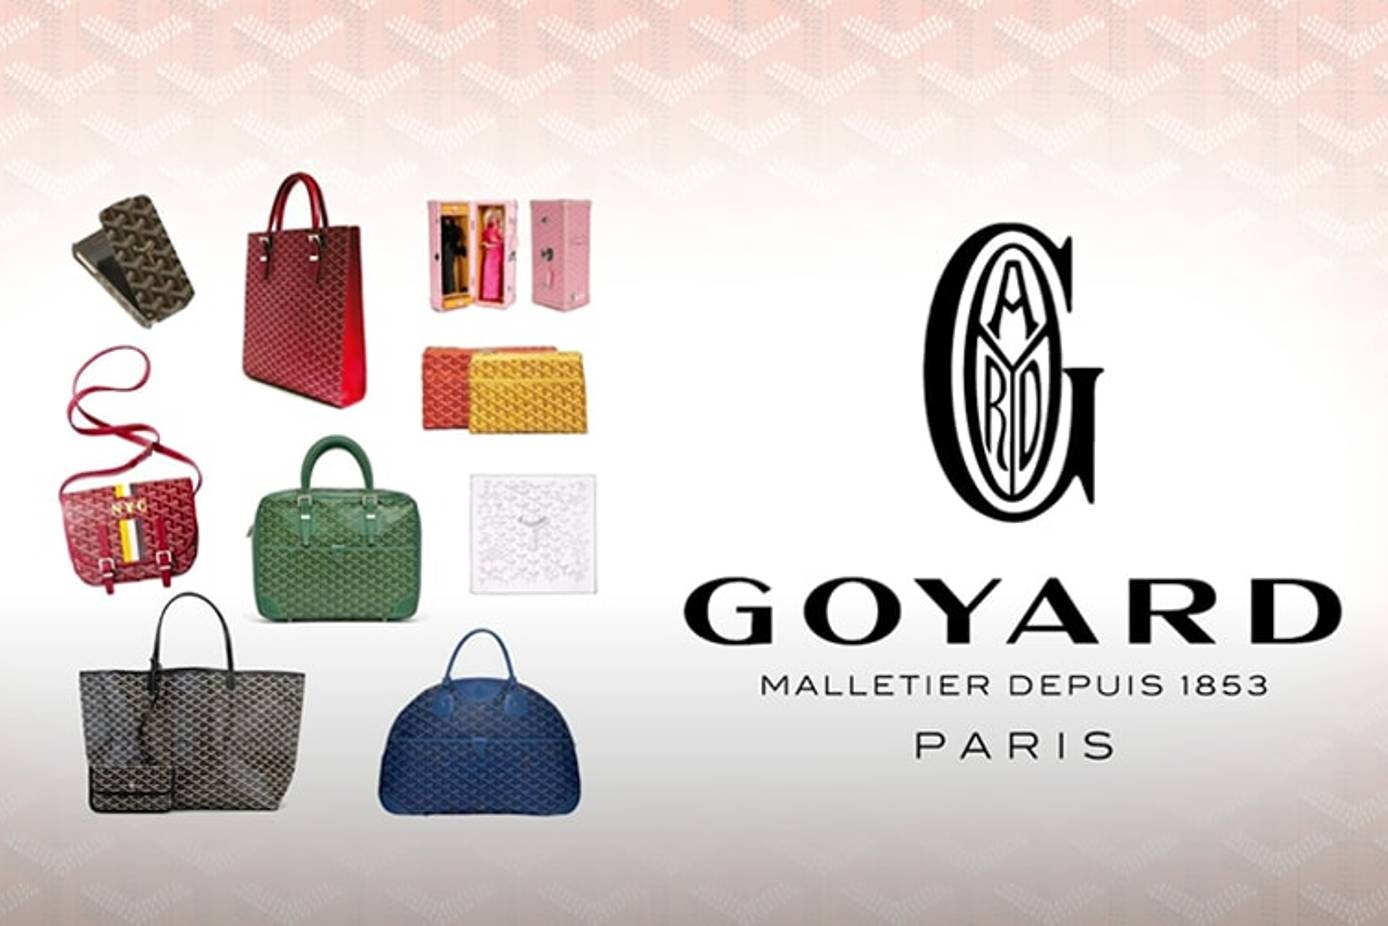 Goyard the most mysterious bag, do you know why?